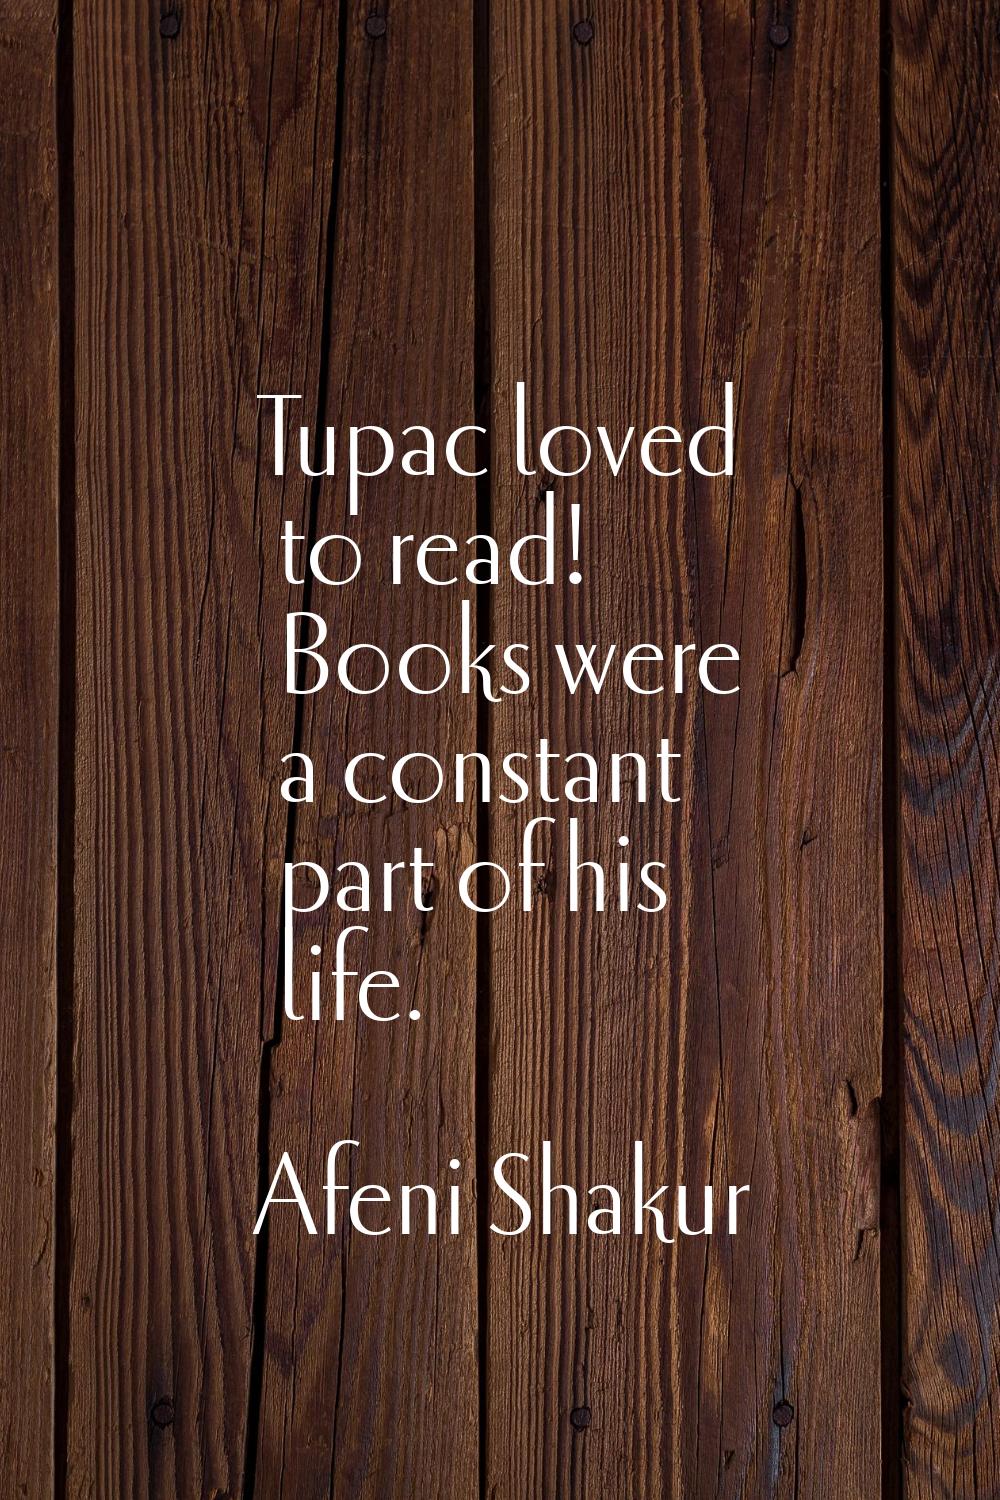 Tupac loved to read! Books were a constant part of his life.